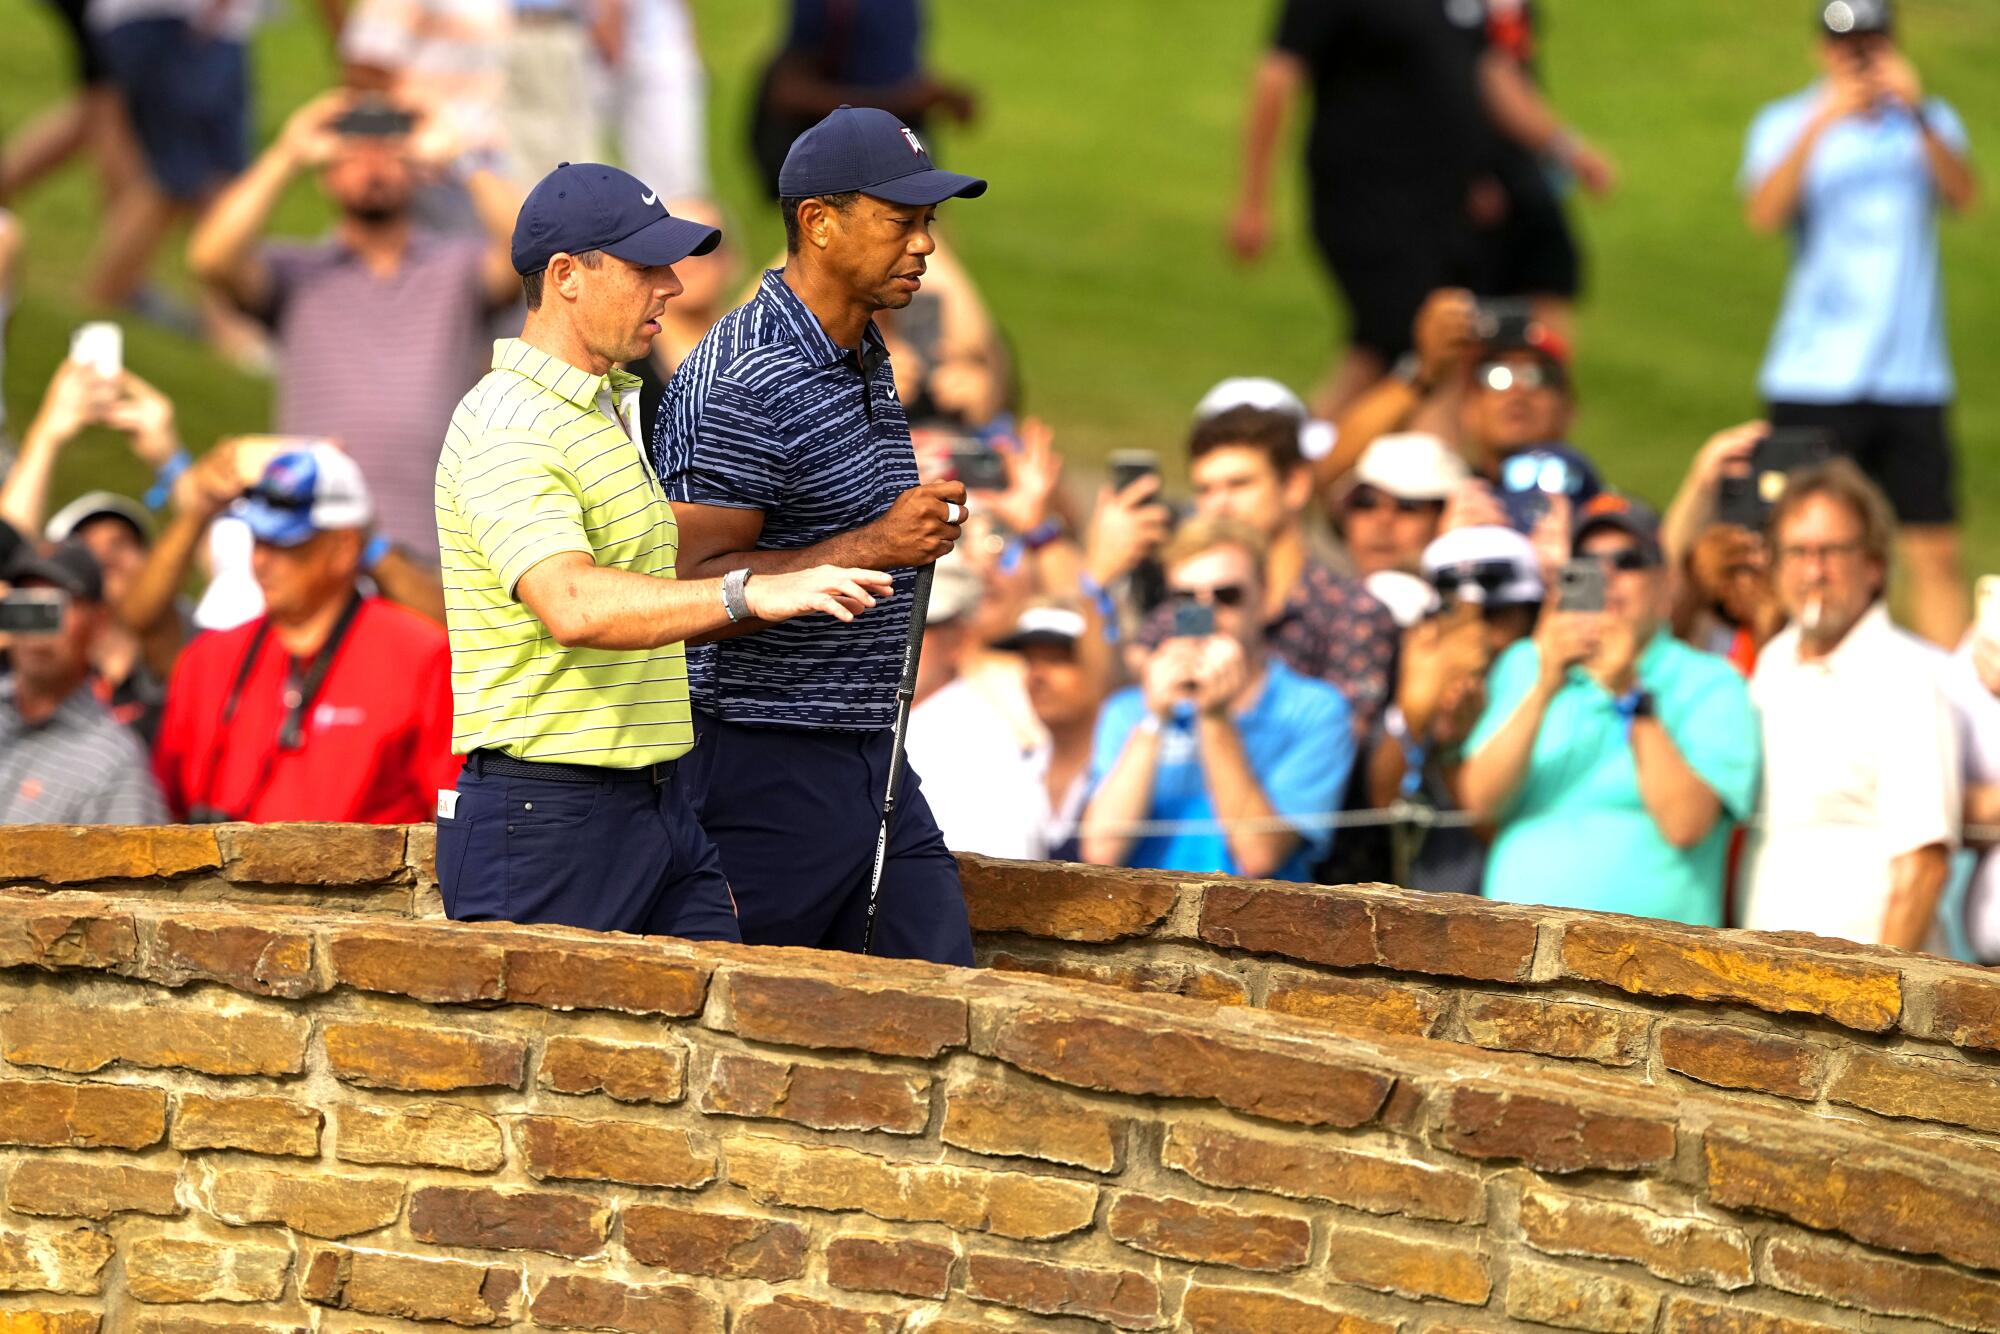 Tiger Woods and Rory McIlroy walk on the 13th hole during the first round of the PGA Championship in Tulsa, Okla.